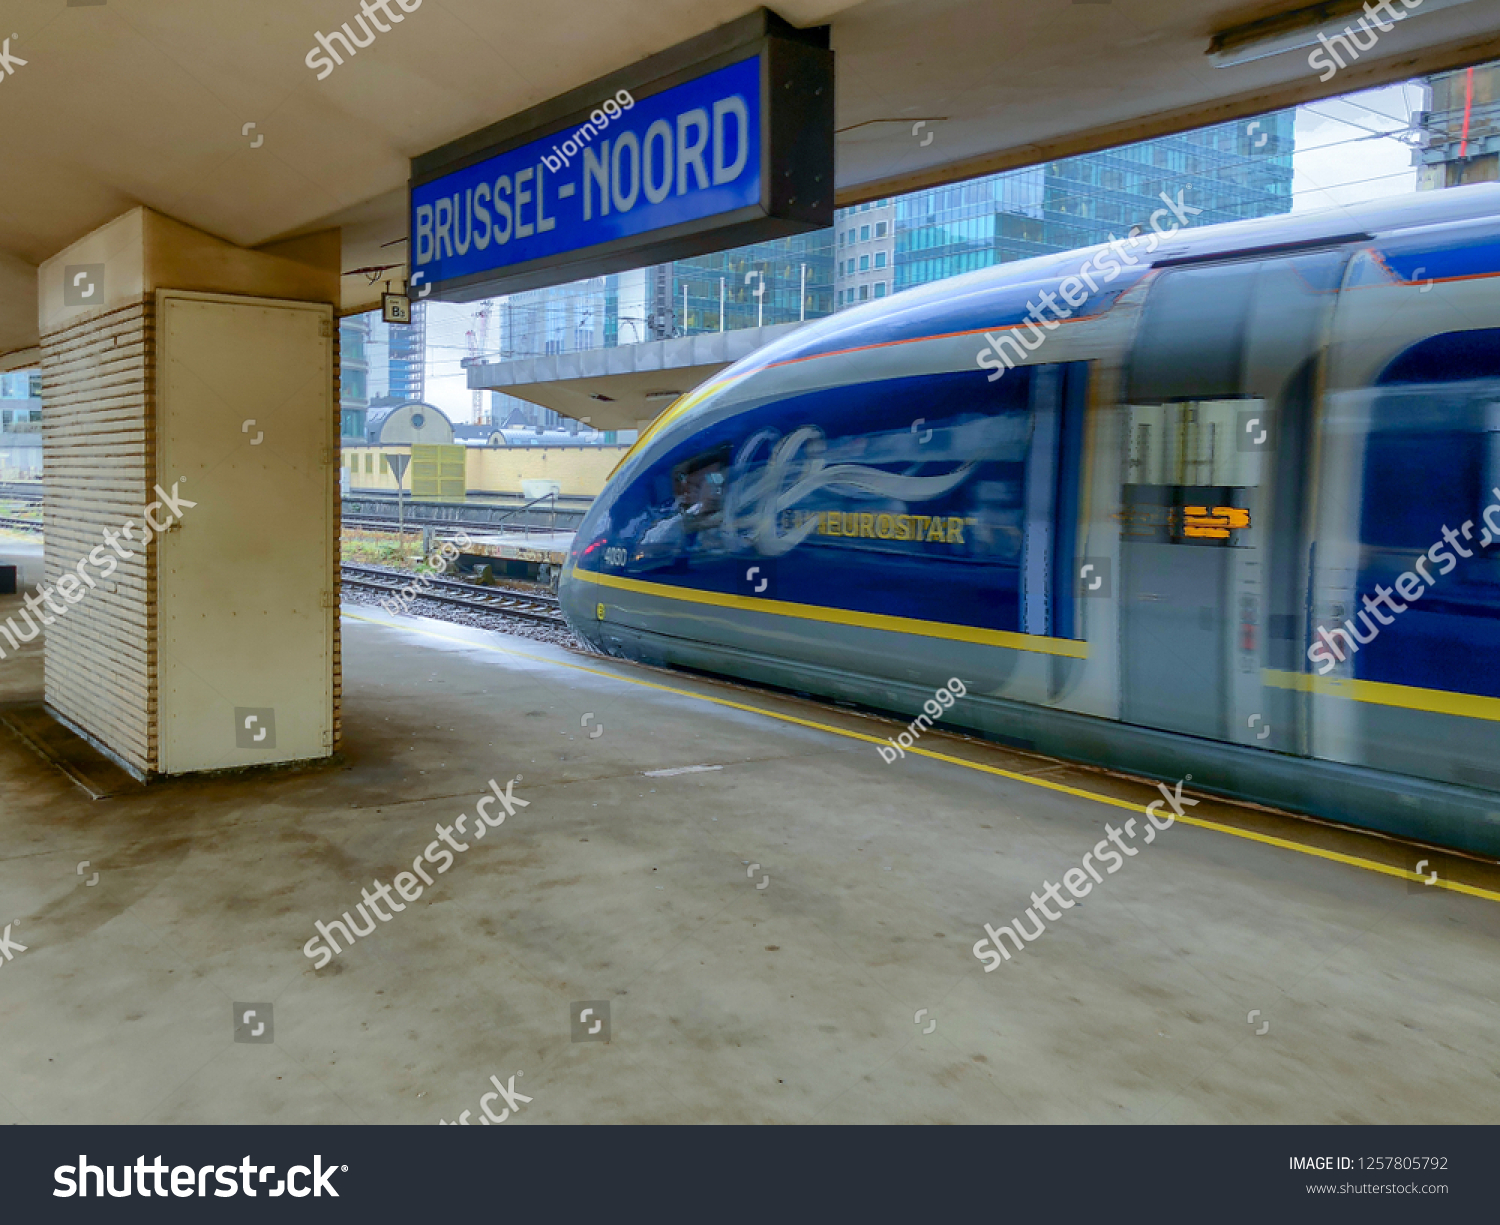 Brussels, Belgium - October 30, 2018: The E320 Eurostar International High Speed passengers Train waiting in the Brussels North railway station